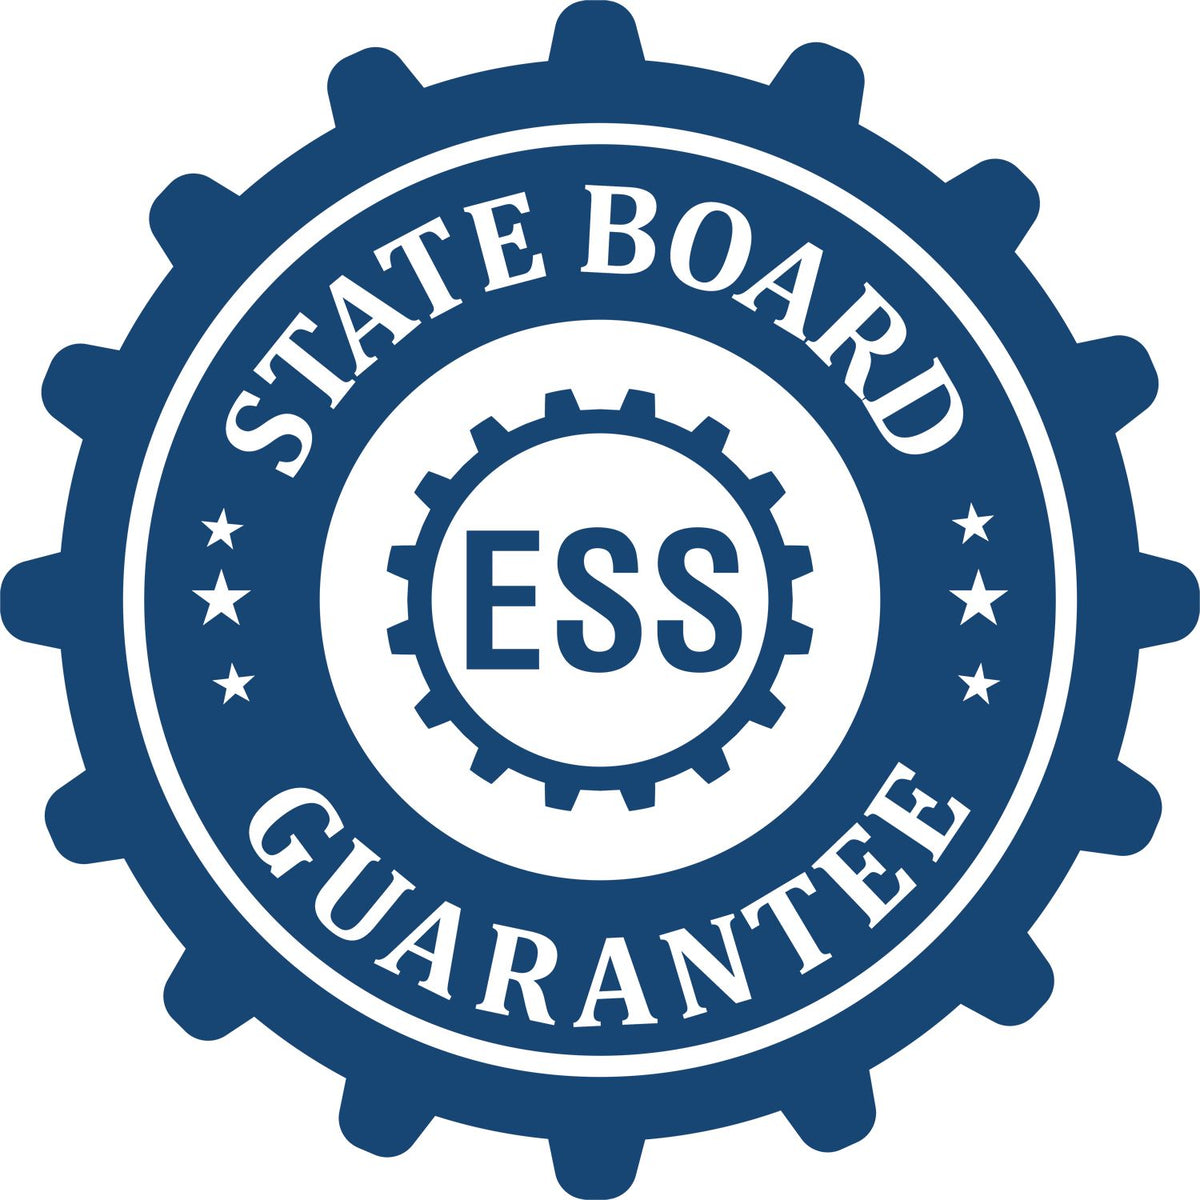 An emblem in a gear shape illustrating a state board guarantee for the Nebraska Landscape Architectural Seal Stamp product.